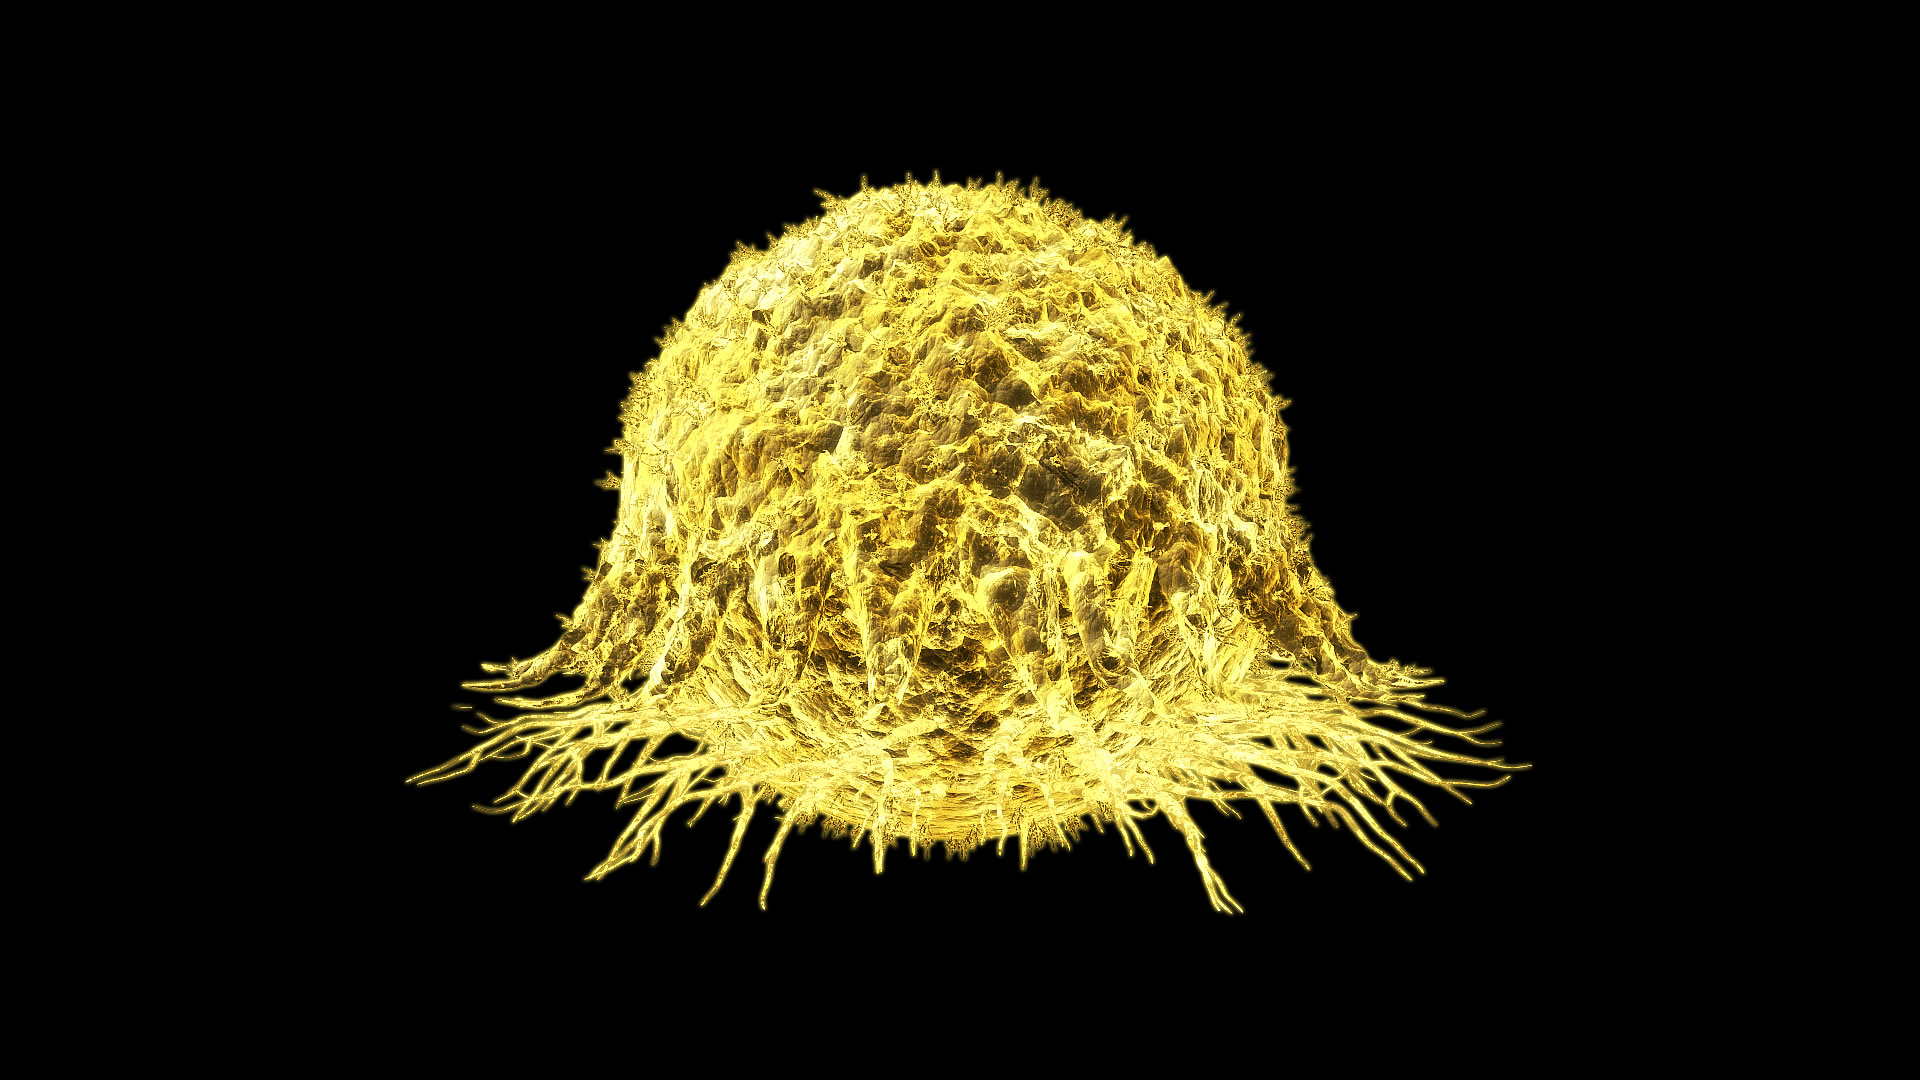 Cancer_Cell_11